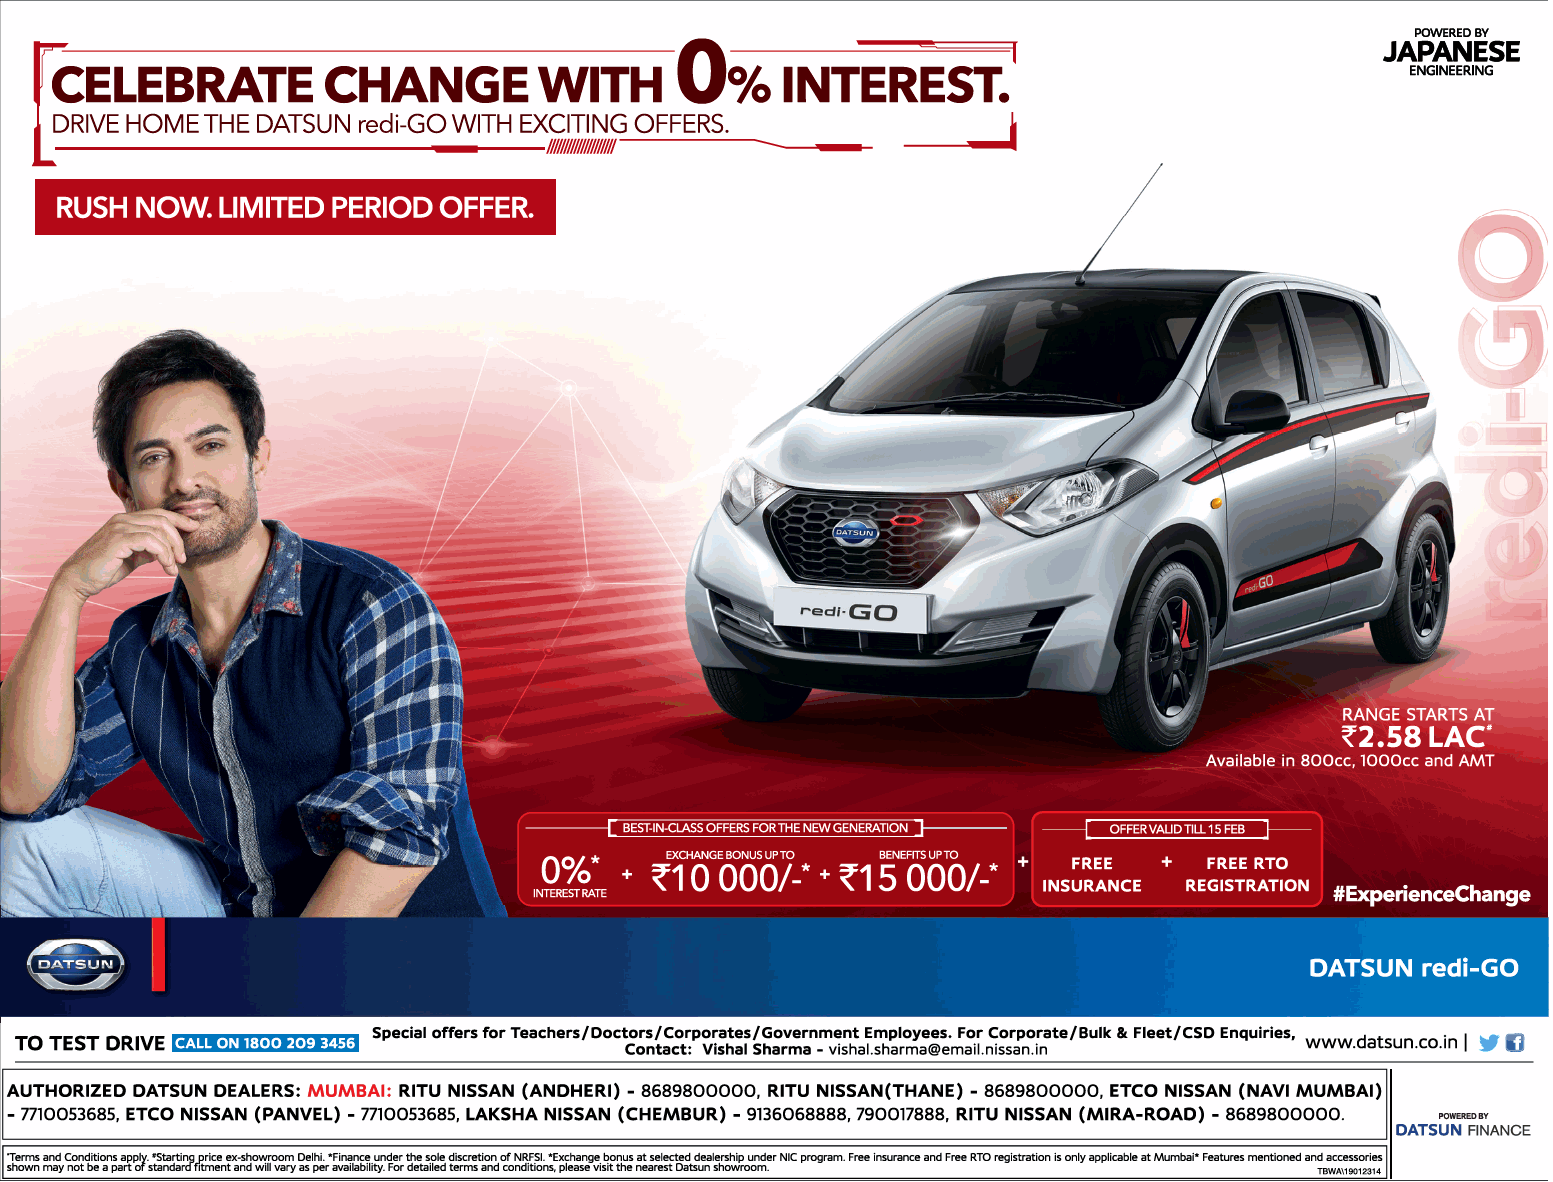 datsun-redi-go-celebrate-chnage-with-05-ineterest-ad-bombay-times-10-02-2019.png